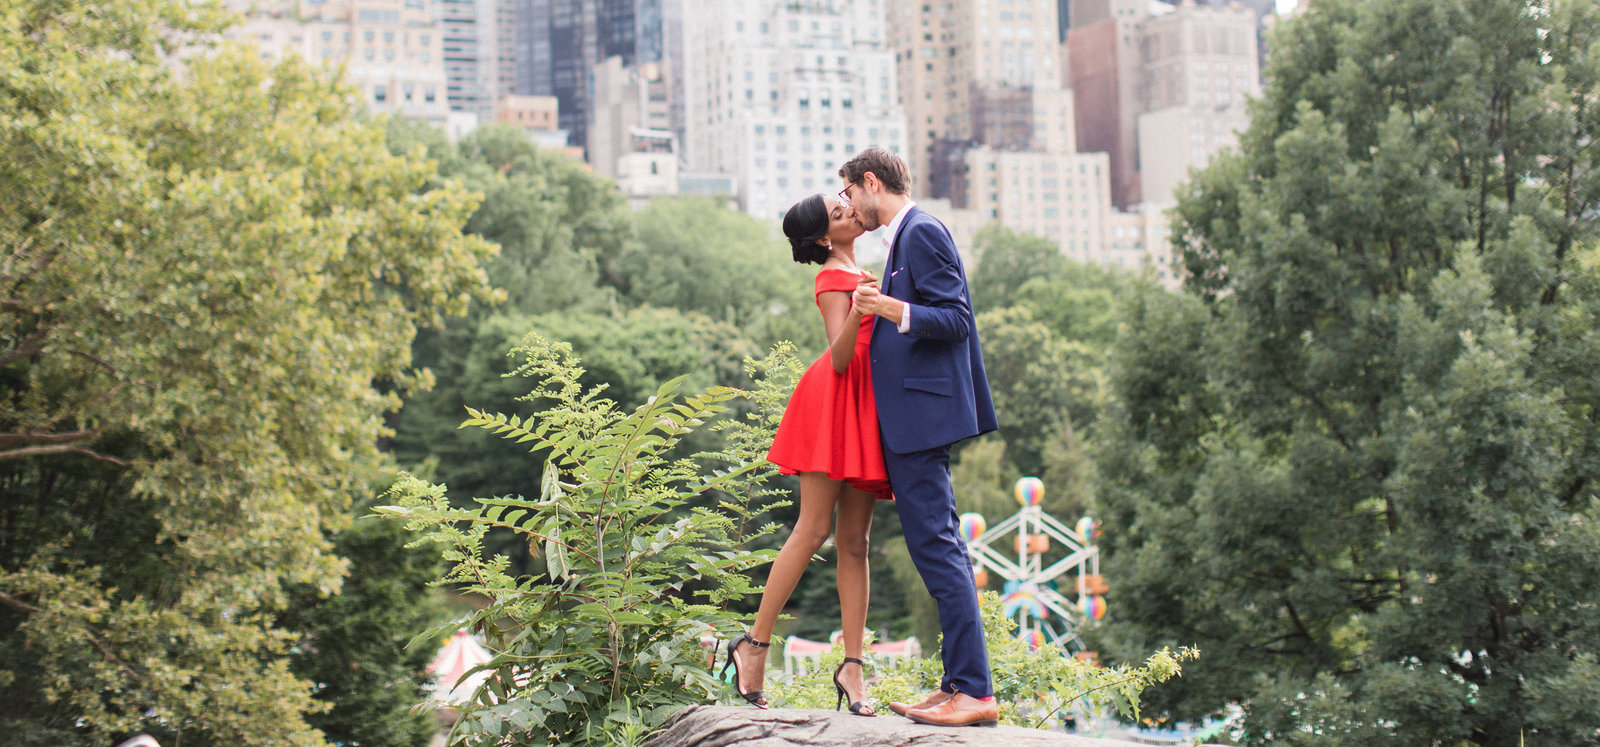 Amy Rizzuto Photography - NYC Wedding Photographer-208d